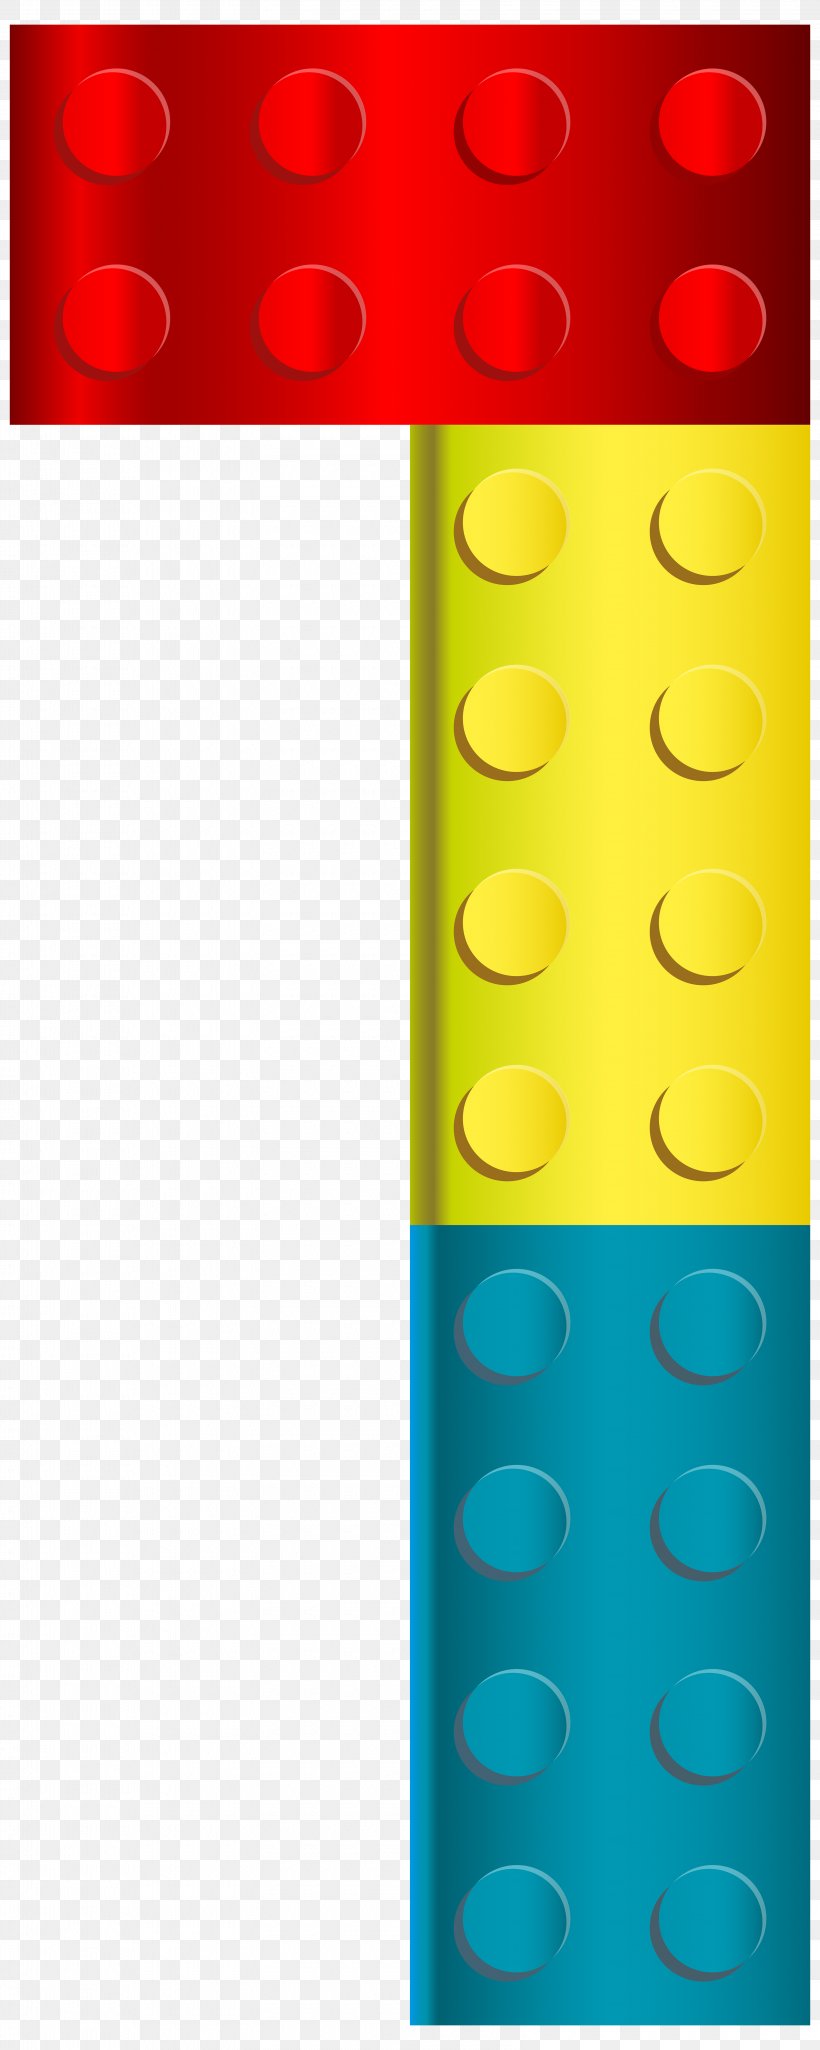 Legoland California The Lego Group Clip Art, PNG, 3200x8000px, Legoland California, Green, Lego, Lego Duplo, Lego Group Download Free